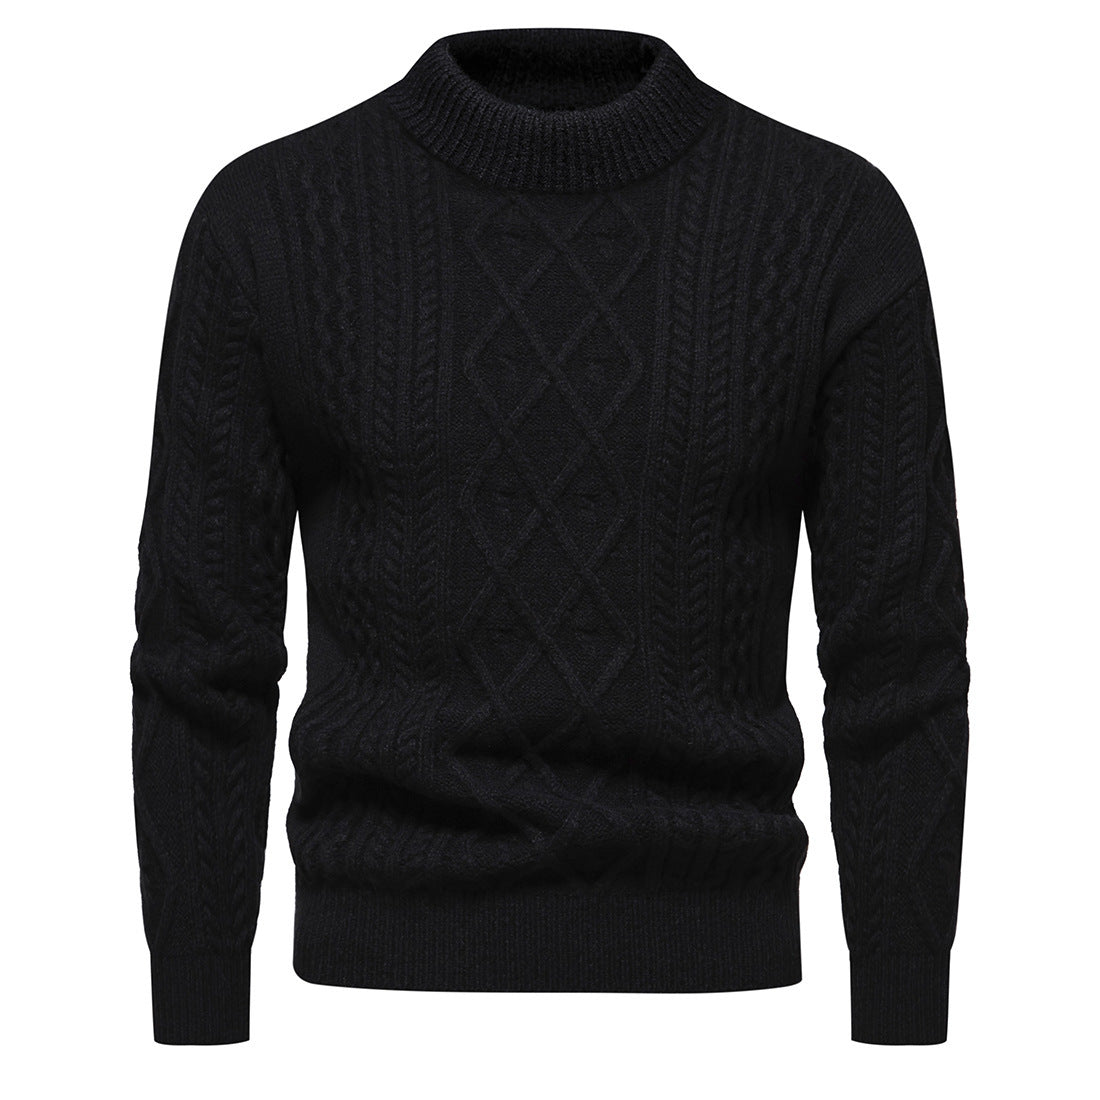 Men's Solid Color Round Neck Sweater Bottoming Shirt